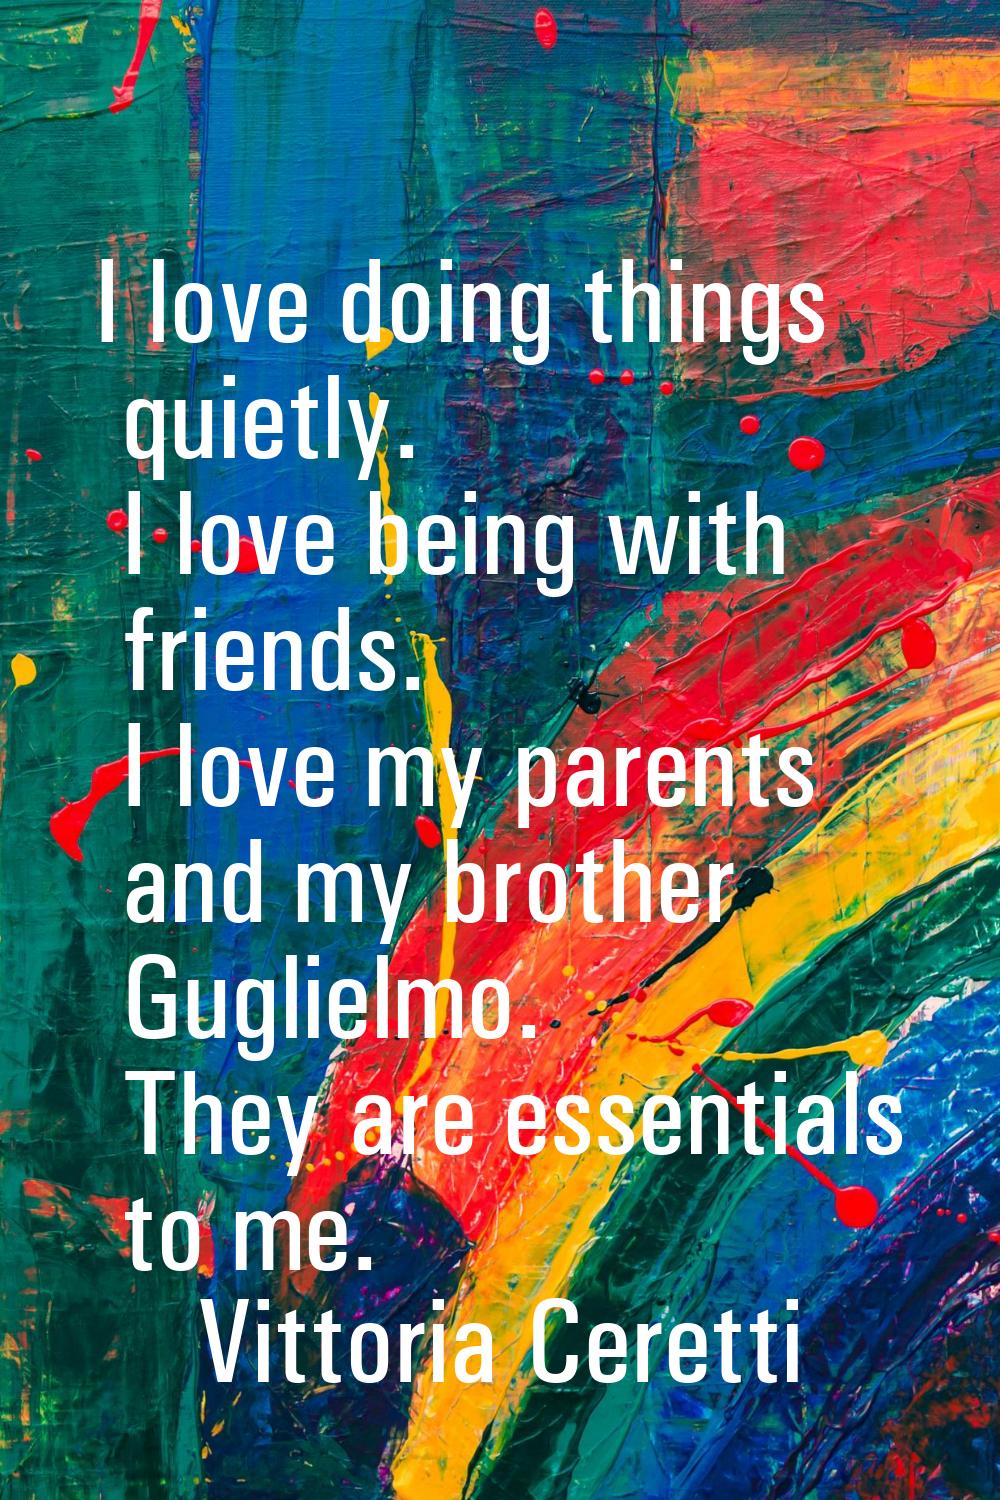 I love doing things quietly. I love being with friends. I love my parents and my brother Guglielmo.